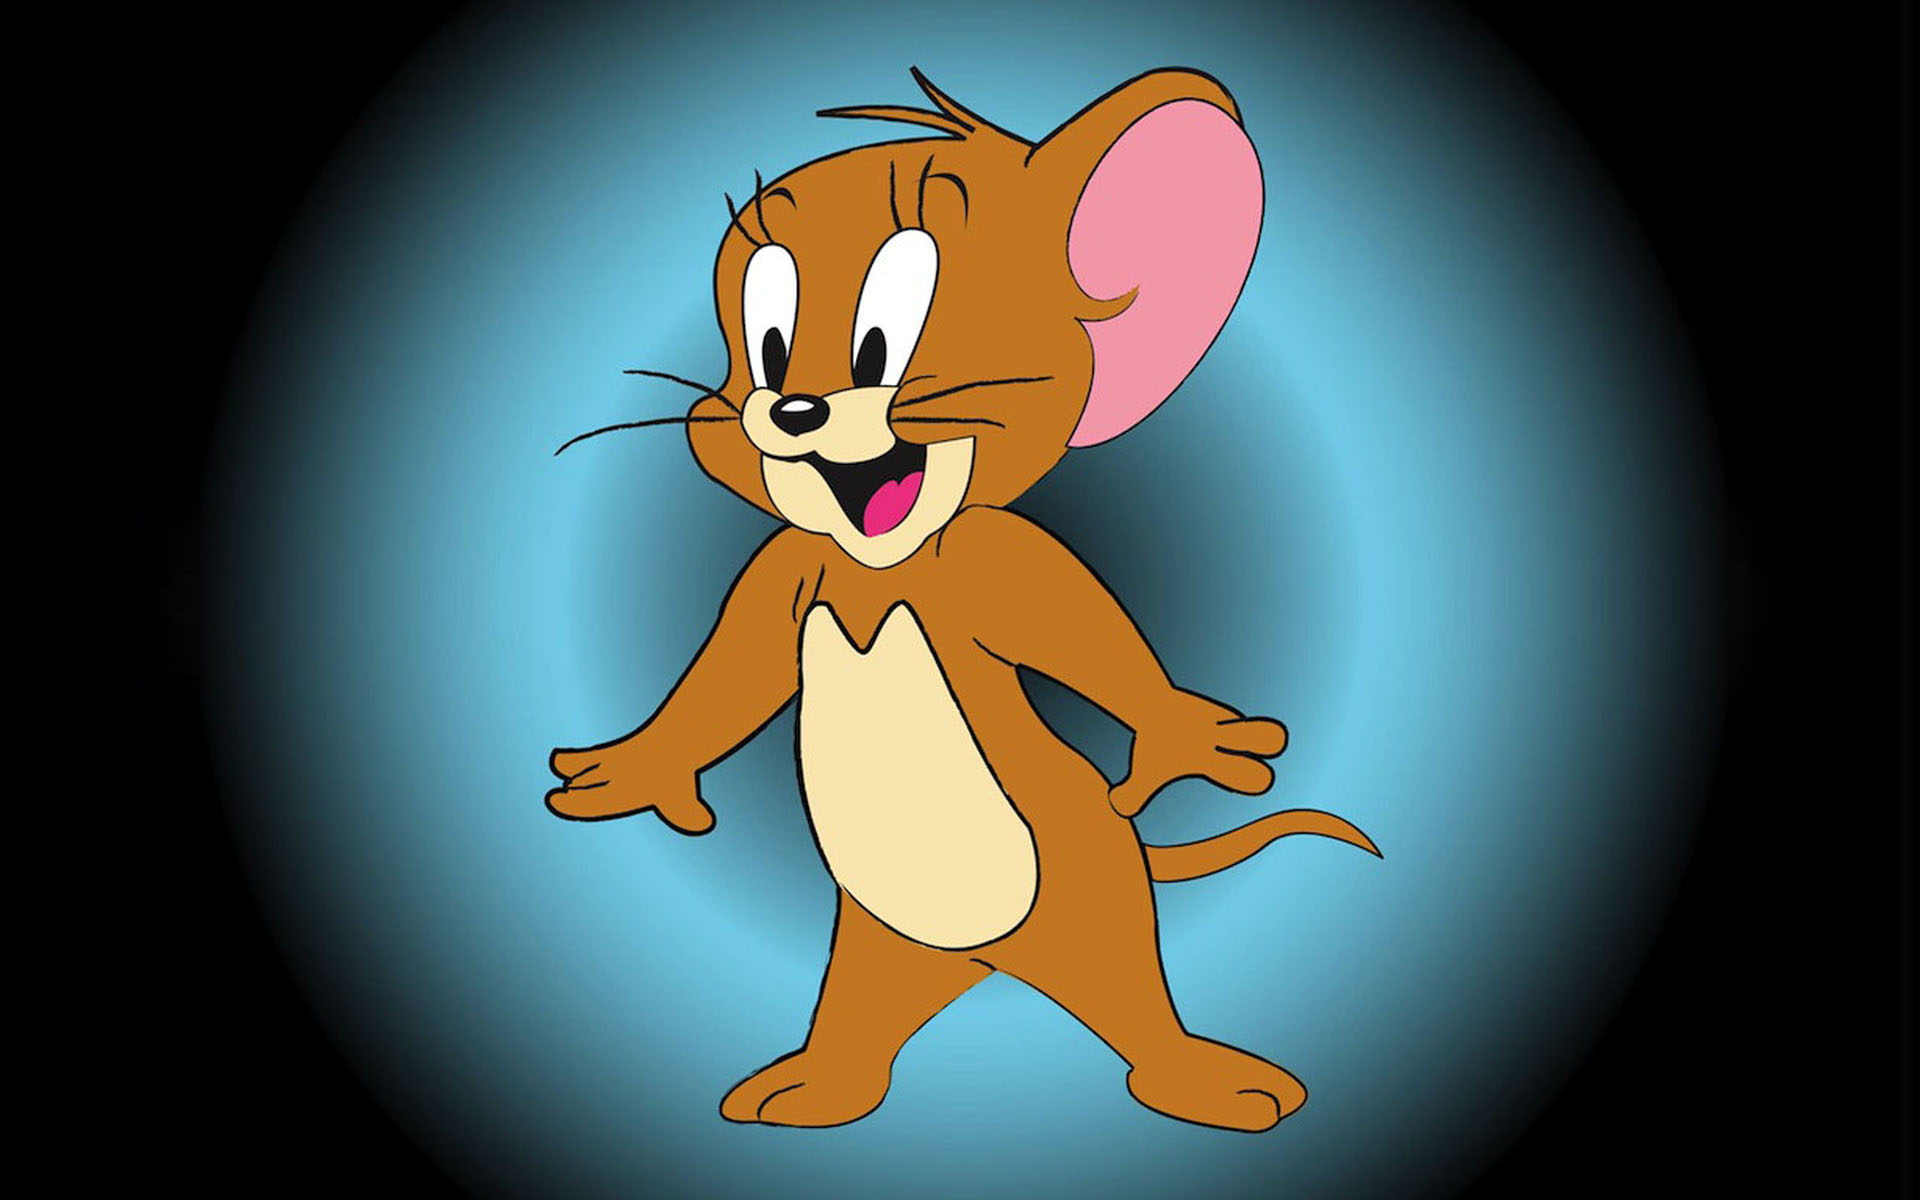 Tom-and-Jerry-Jerry-Mouse Picture Desktop Wallpaper full HD-1920x1200